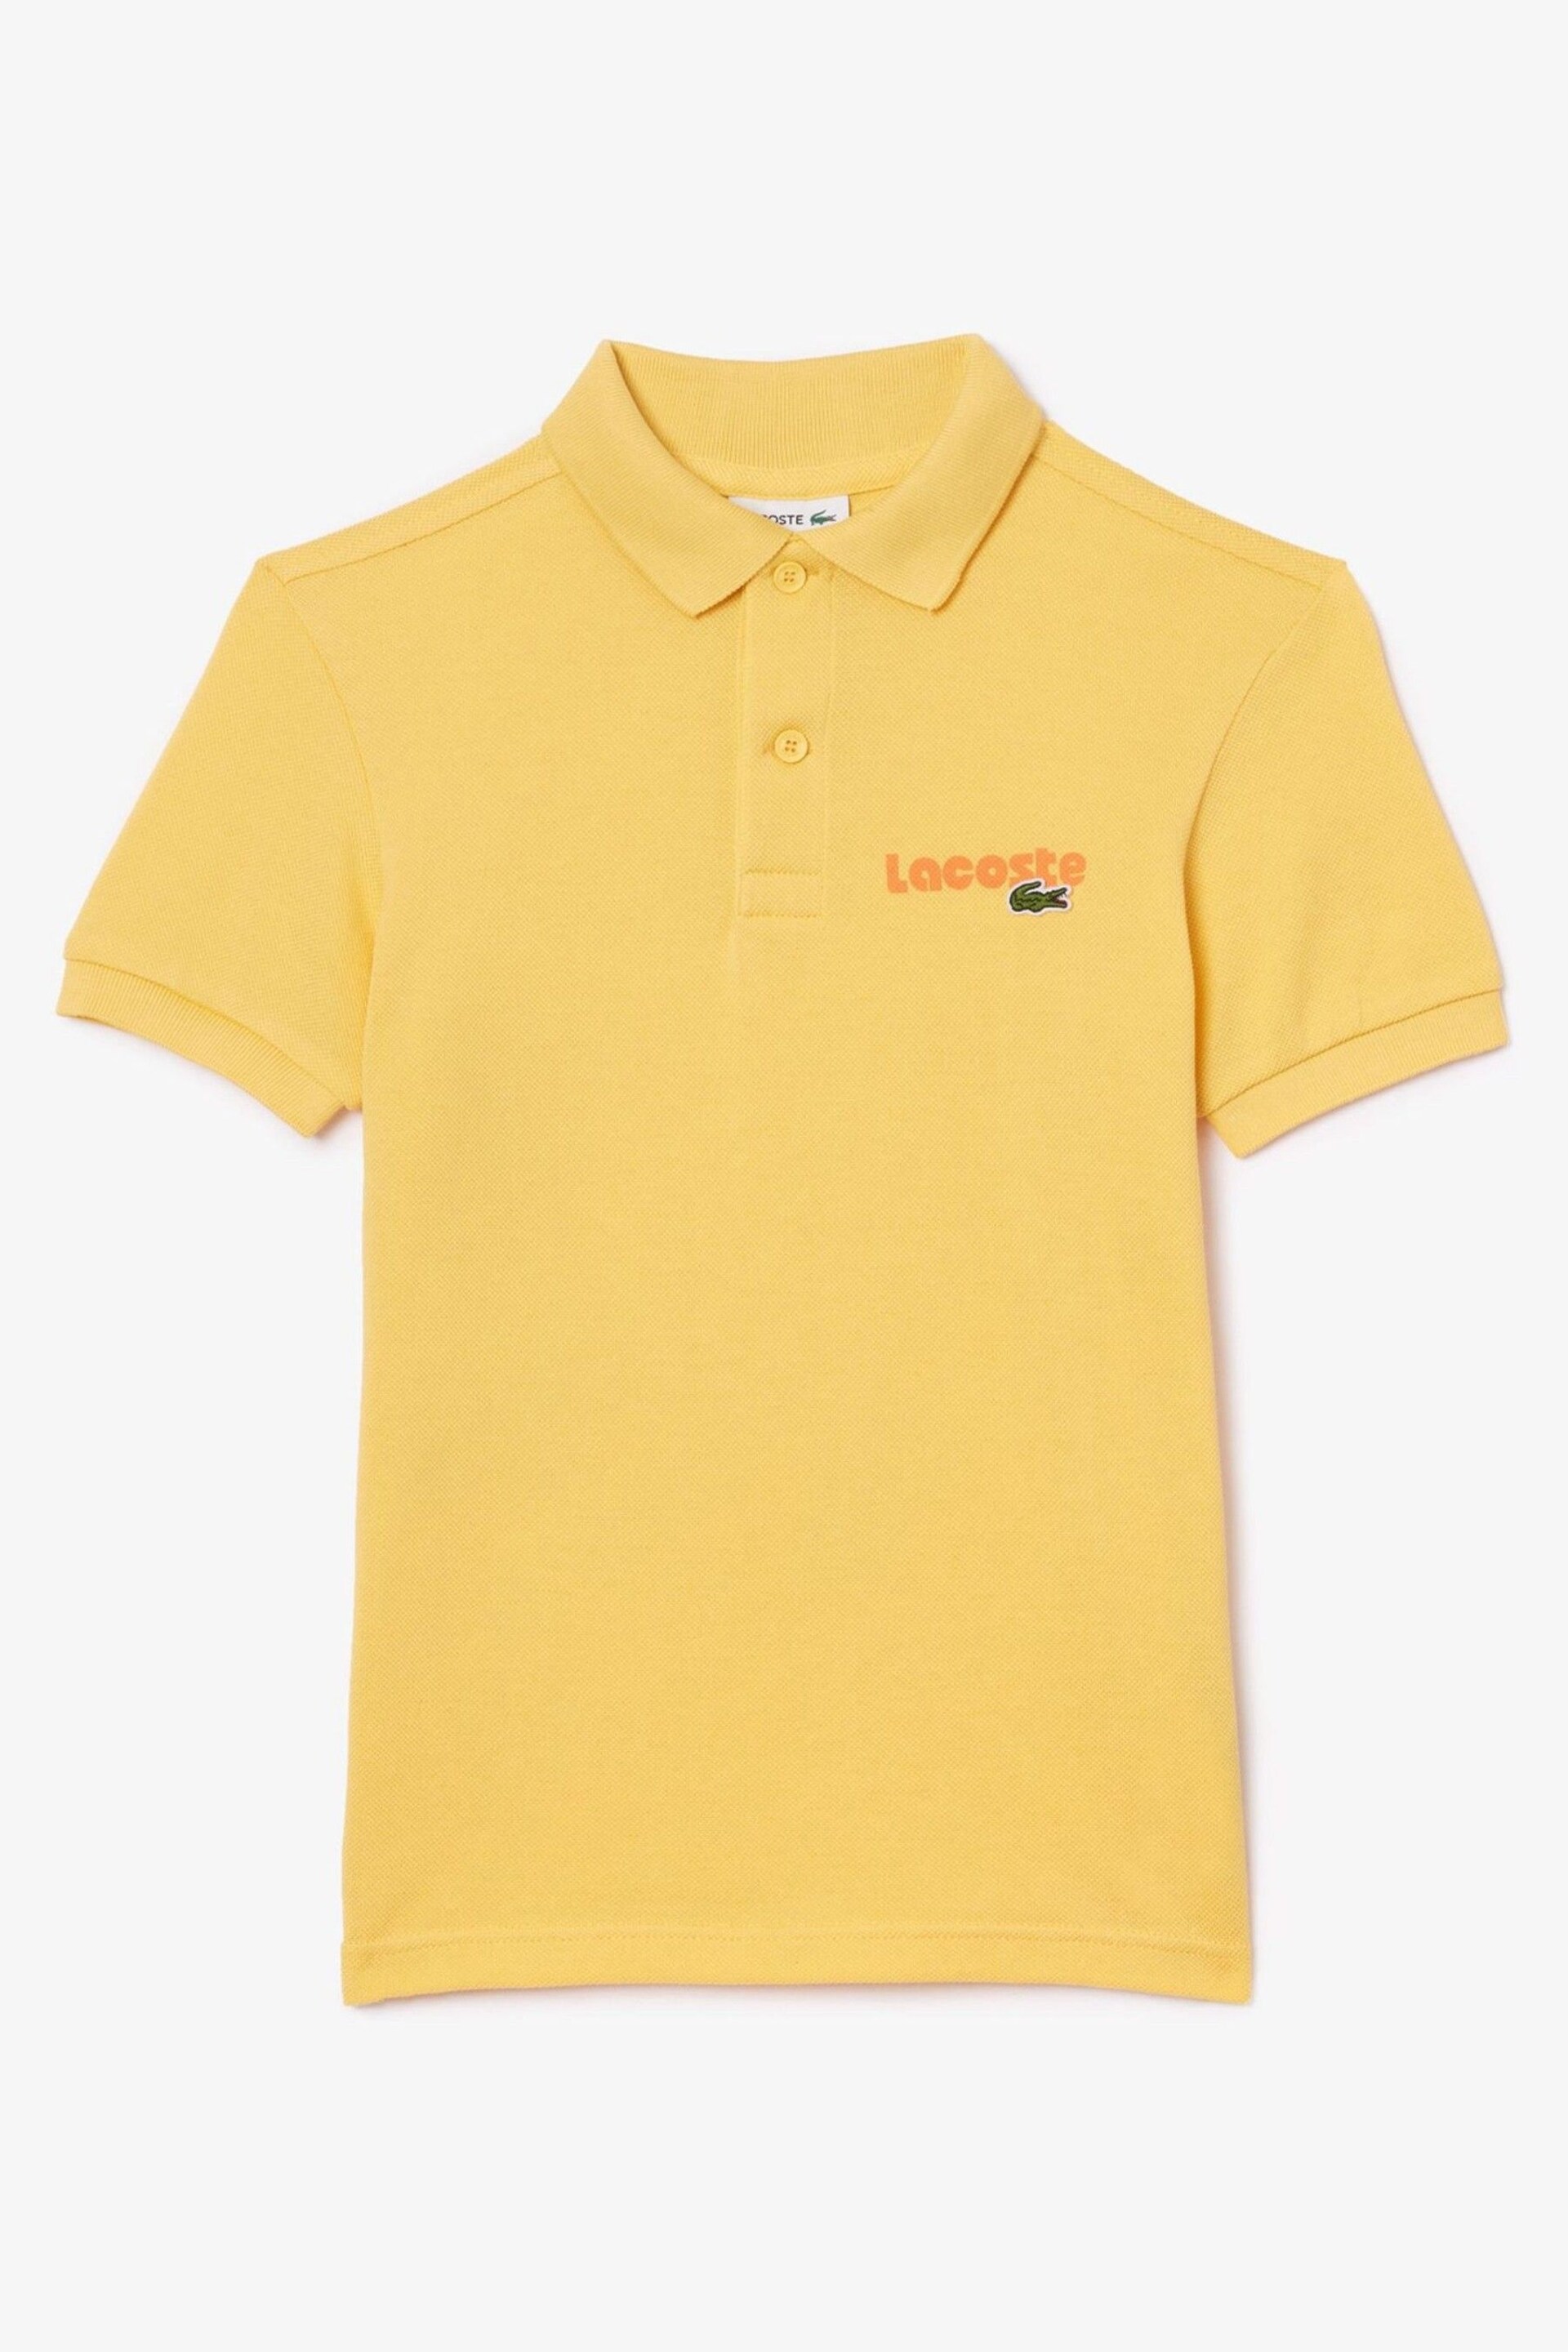 Lacoste Children's Updated Logo Polo Shirt - Image 5 of 7